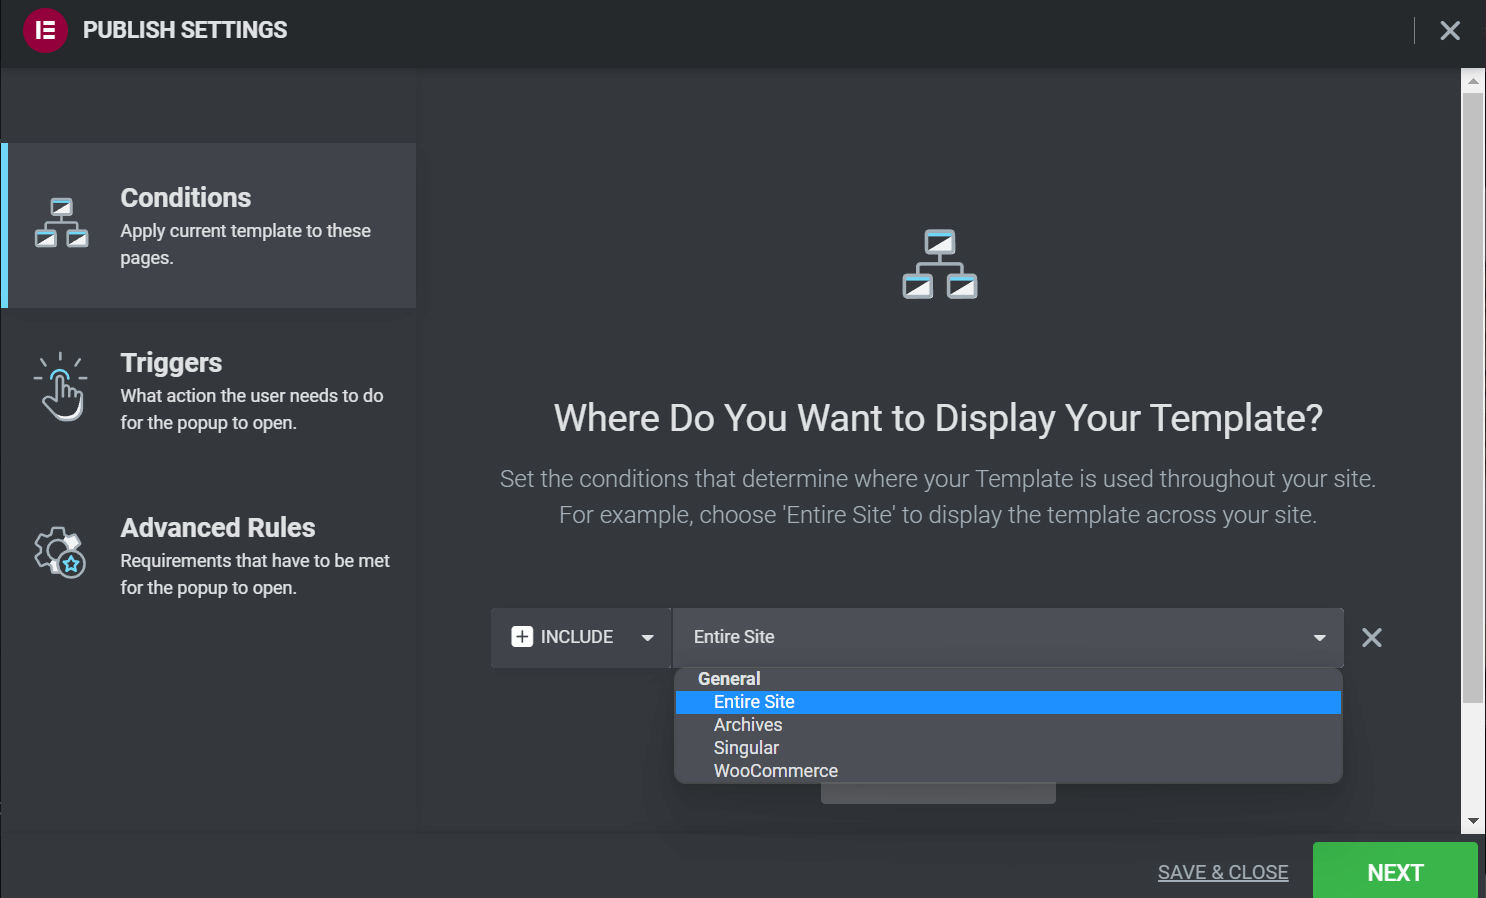 Choose where you want to display the popup on your site